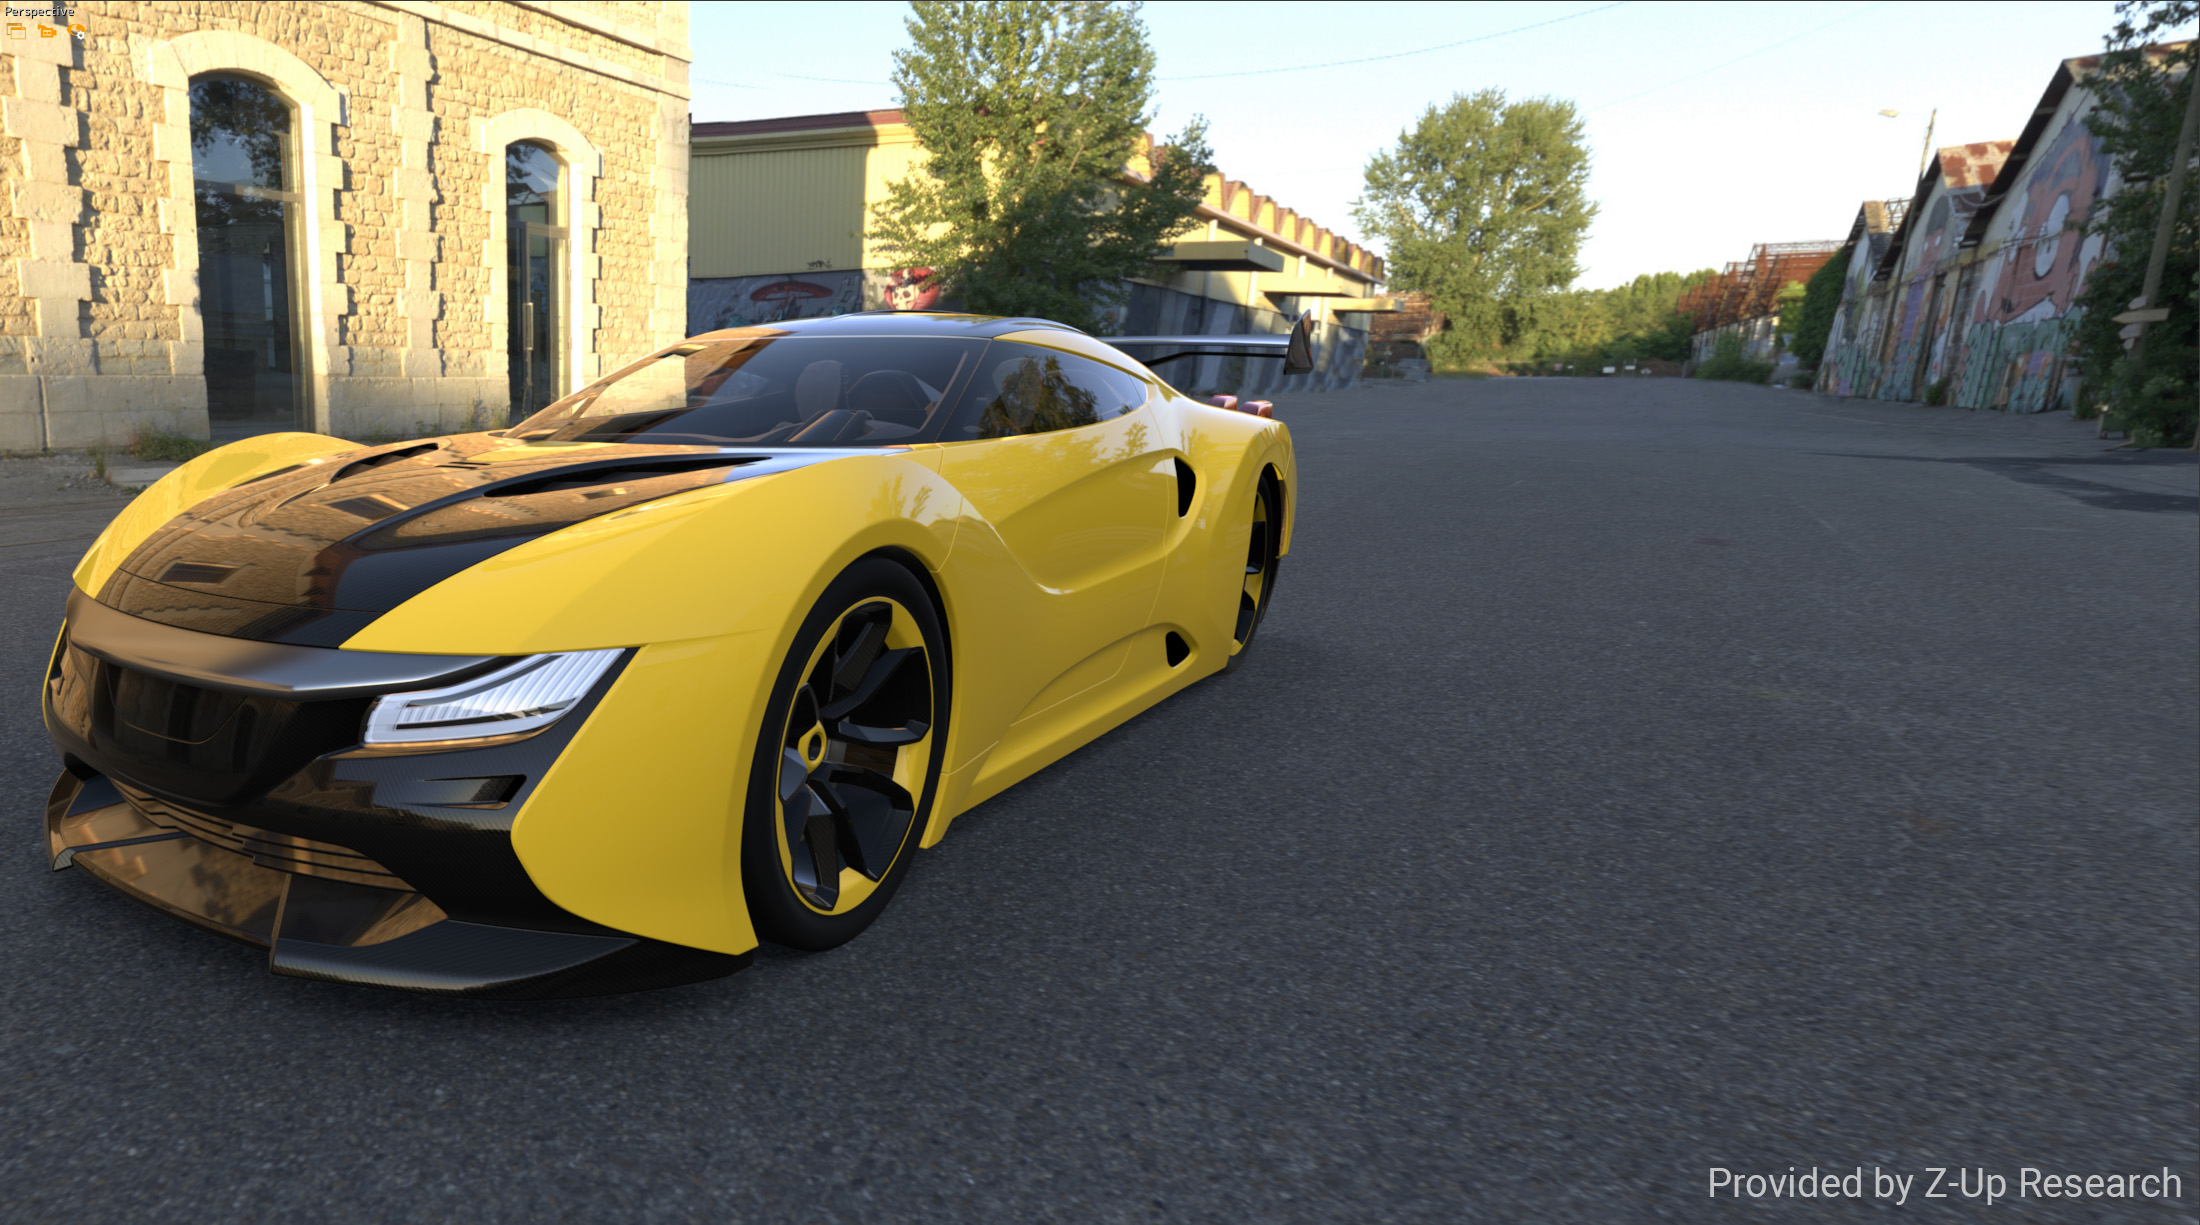 The has been translated with the Lens Shift tool. The car perspective is not accentuated.